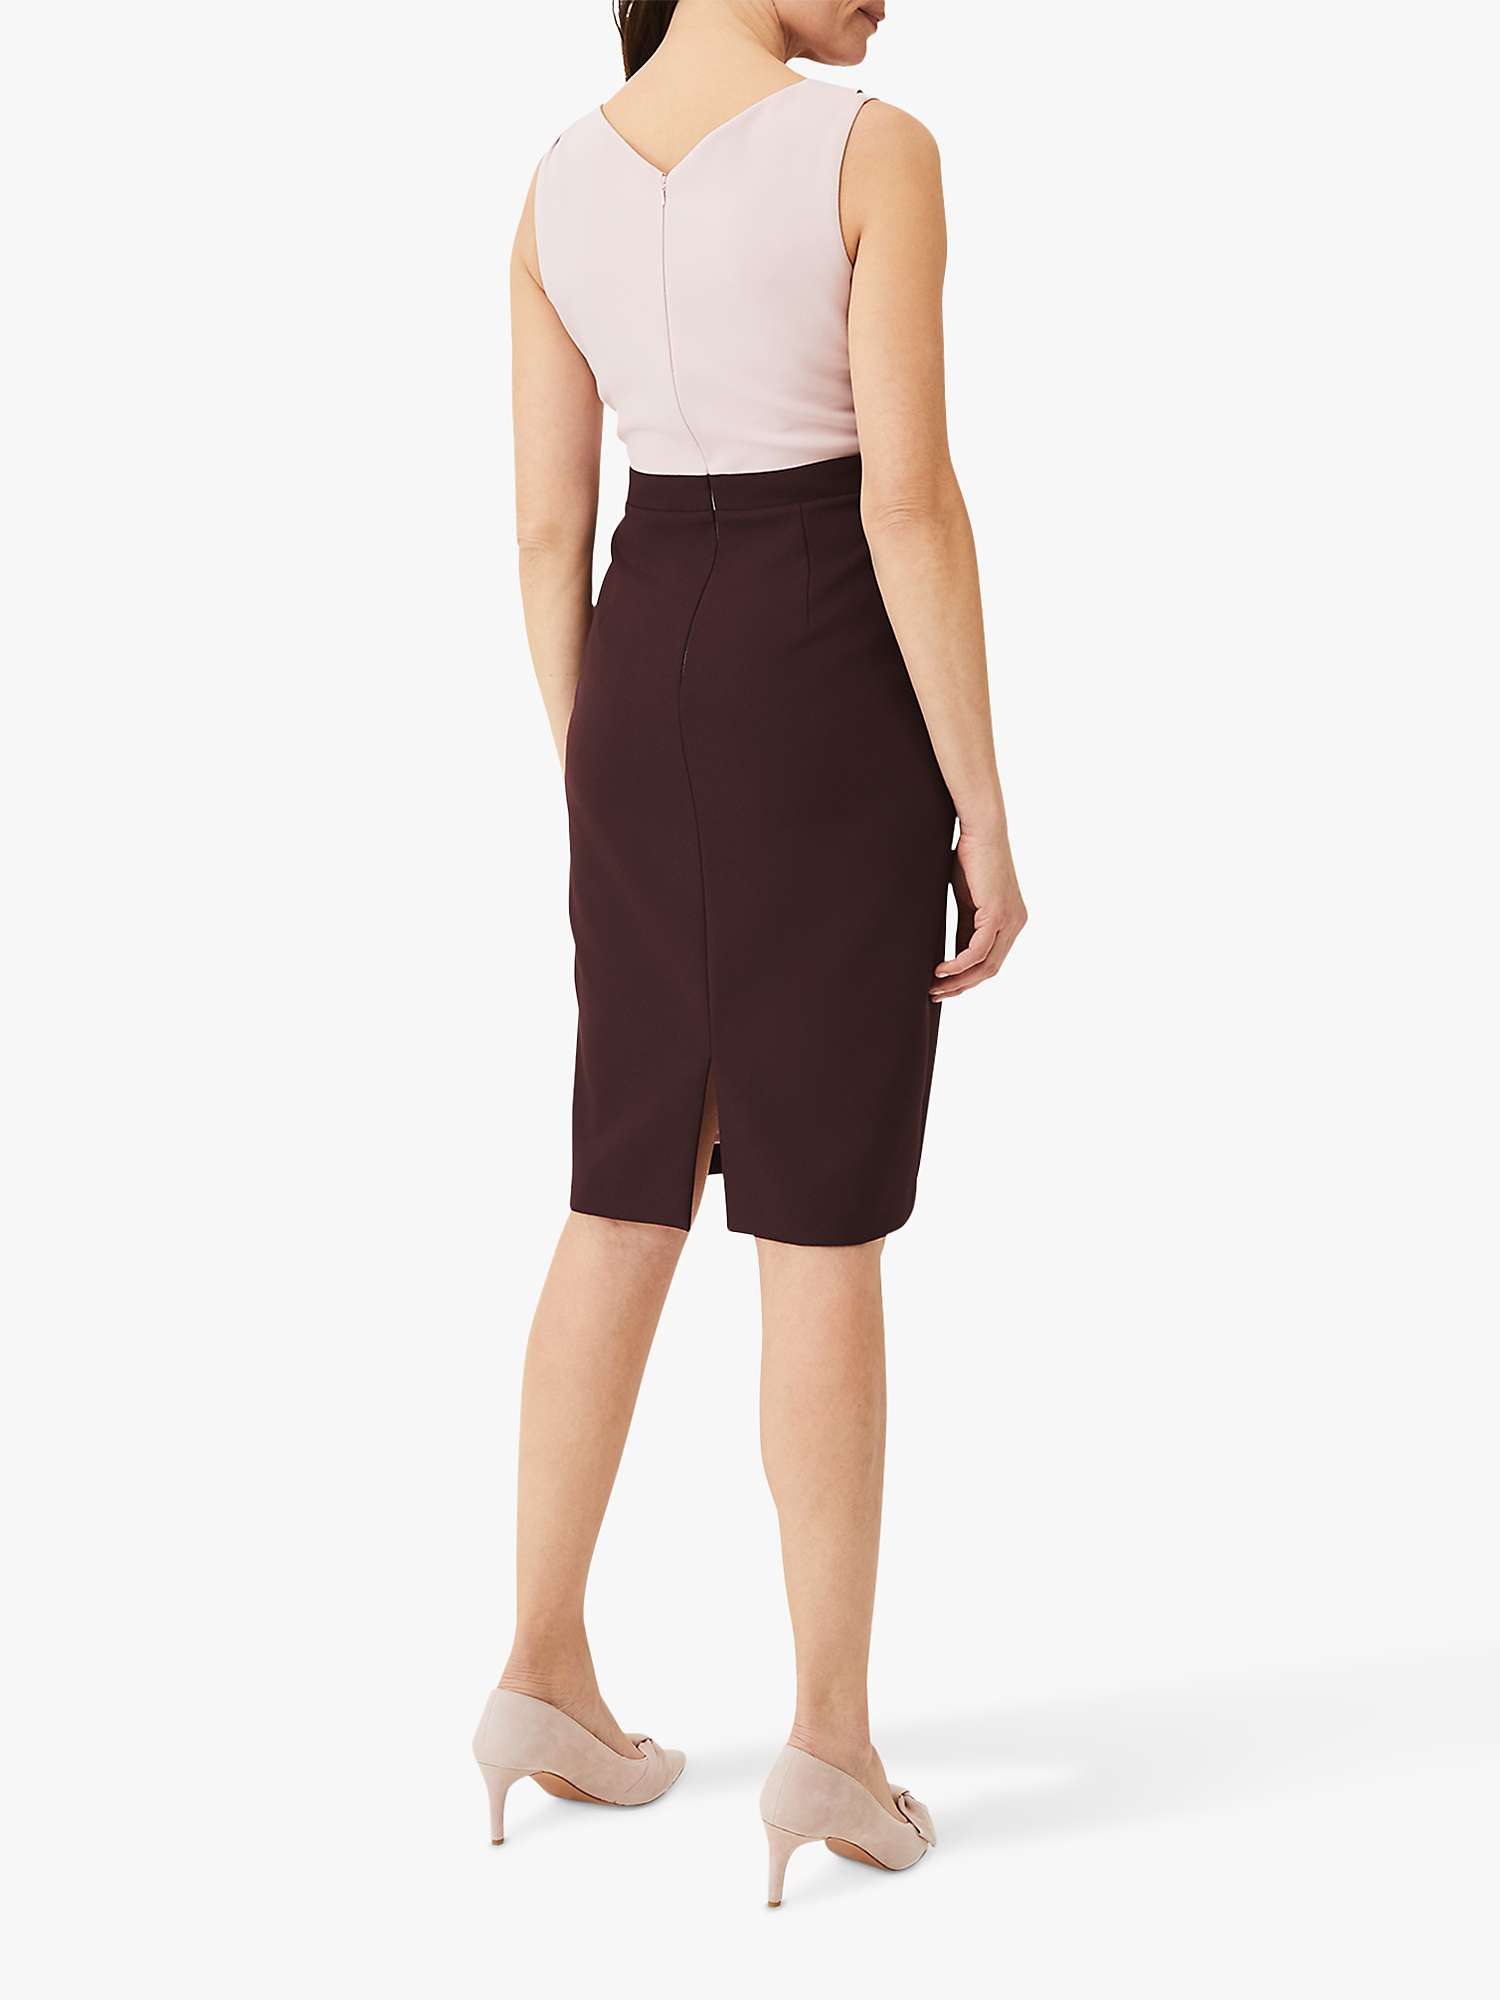 Buy Phase Eight Tandy Dress, Antique Rose/Wine Online at johnlewis.com